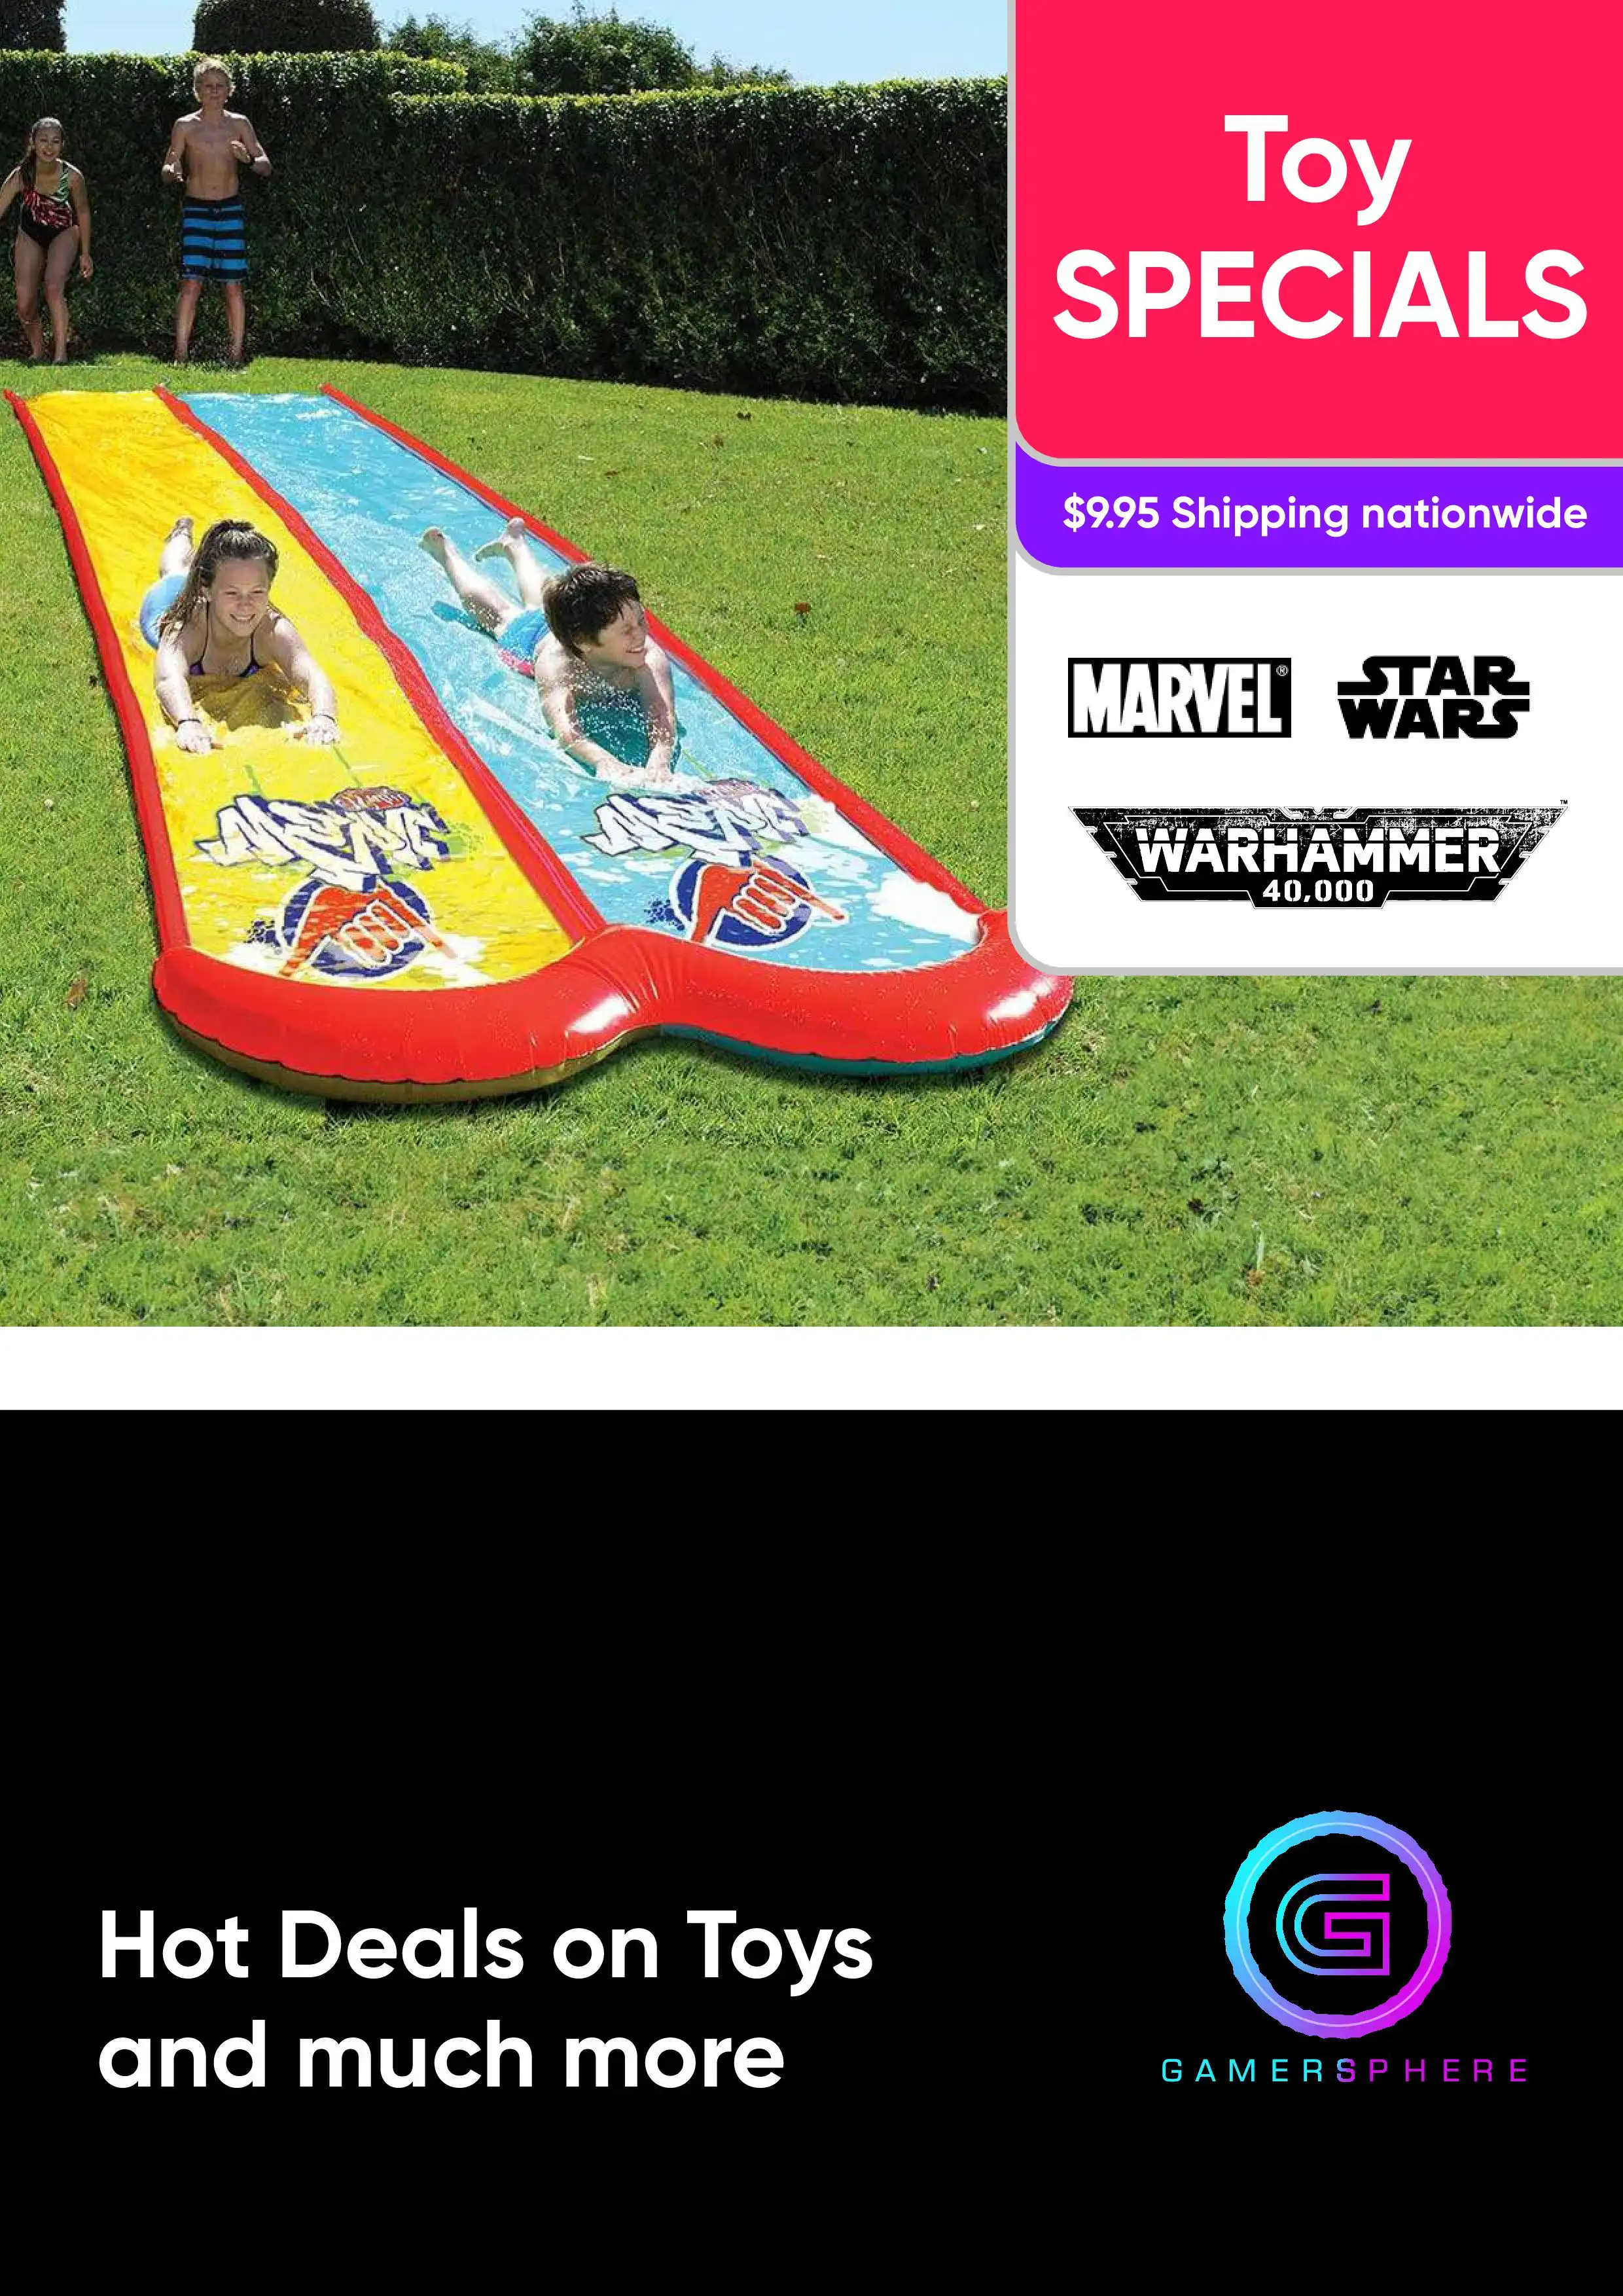 Hot Deals on Toys and much more